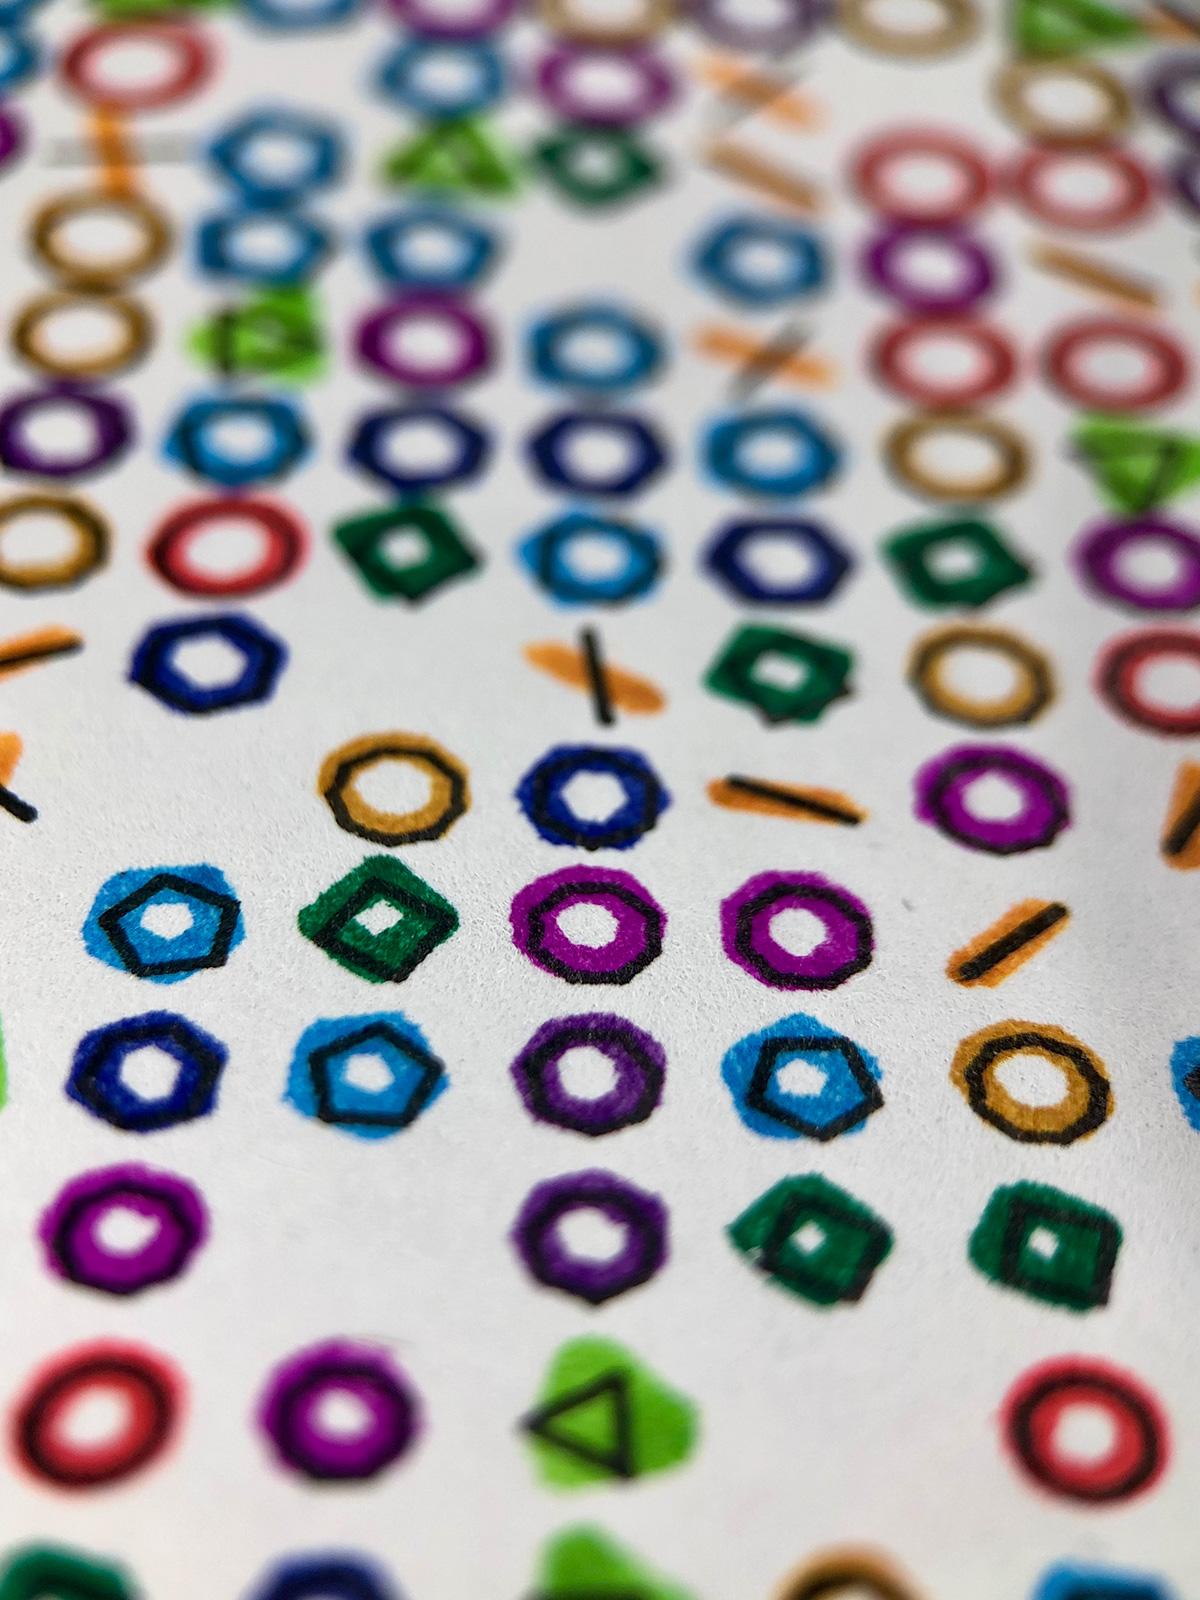 A close-up view of a few of the colourful shapes